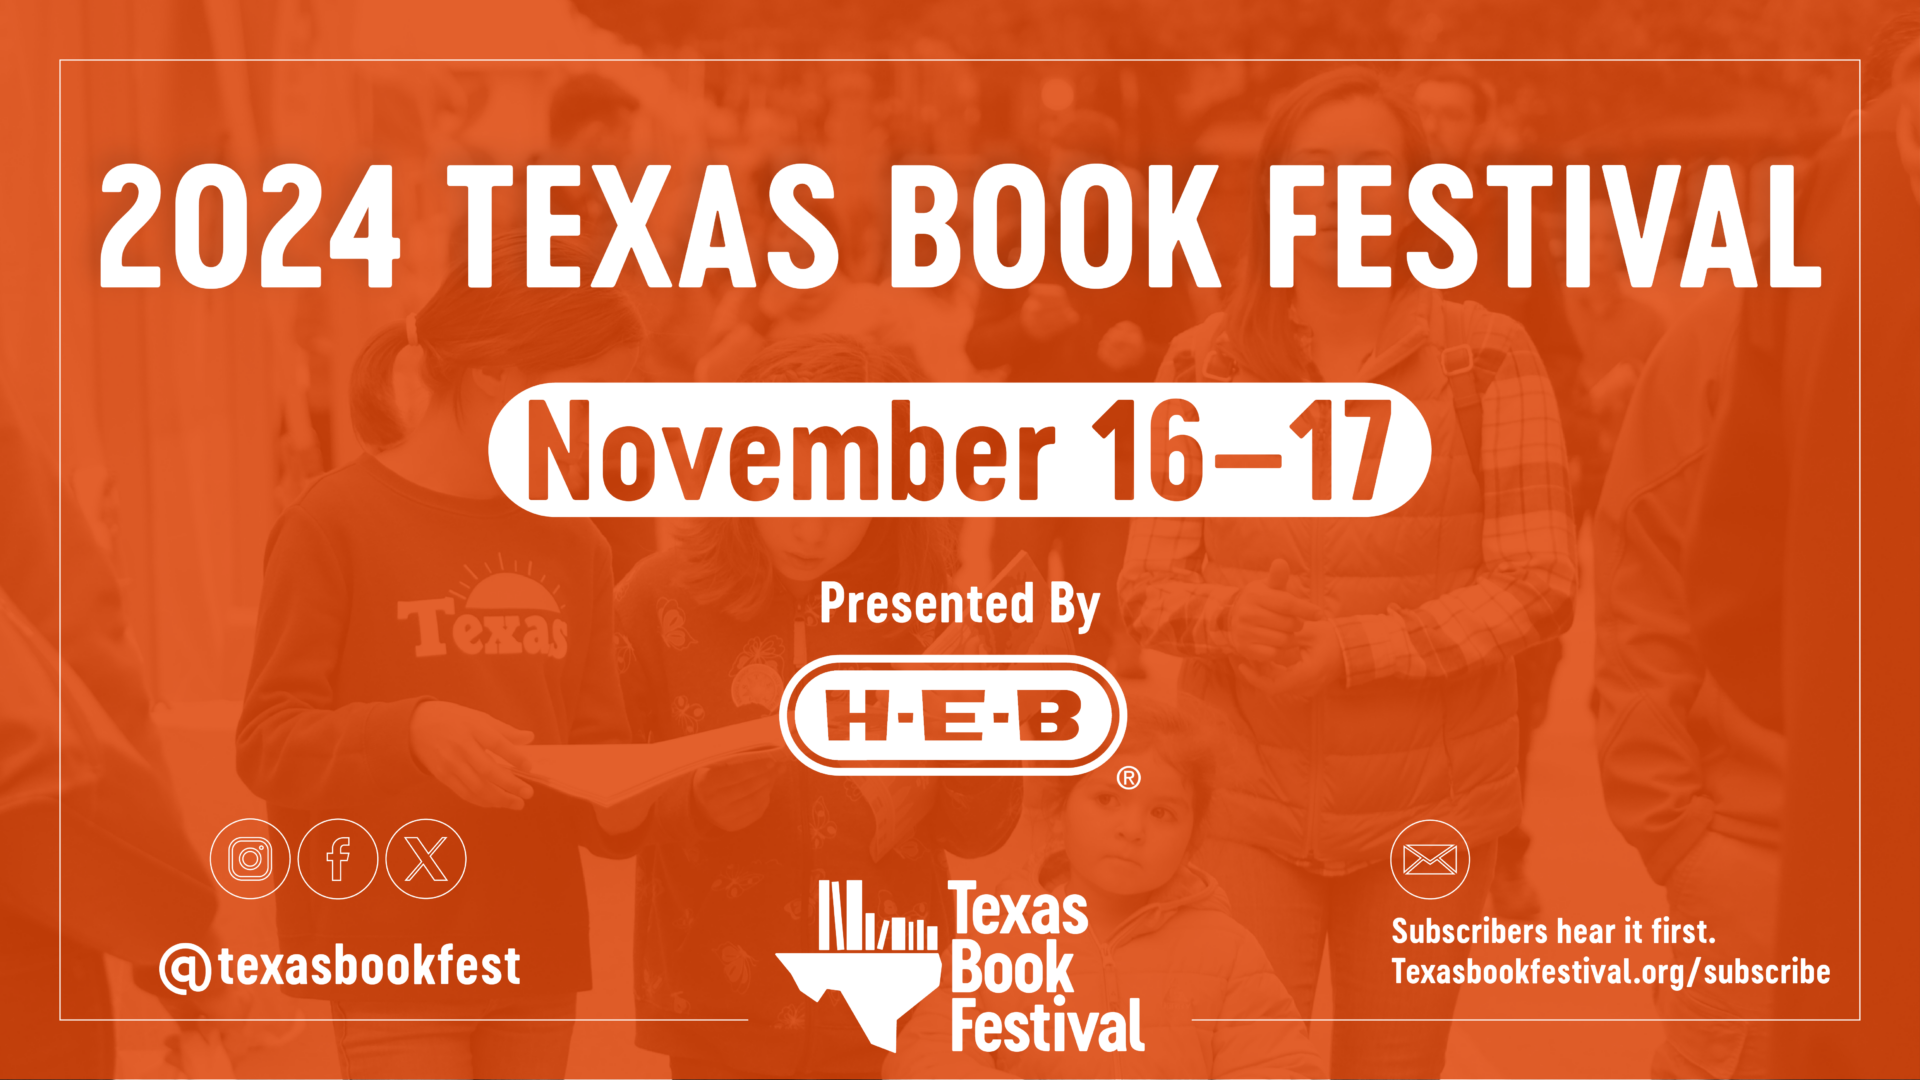 Save the 2024 Texas Book Festival Dates